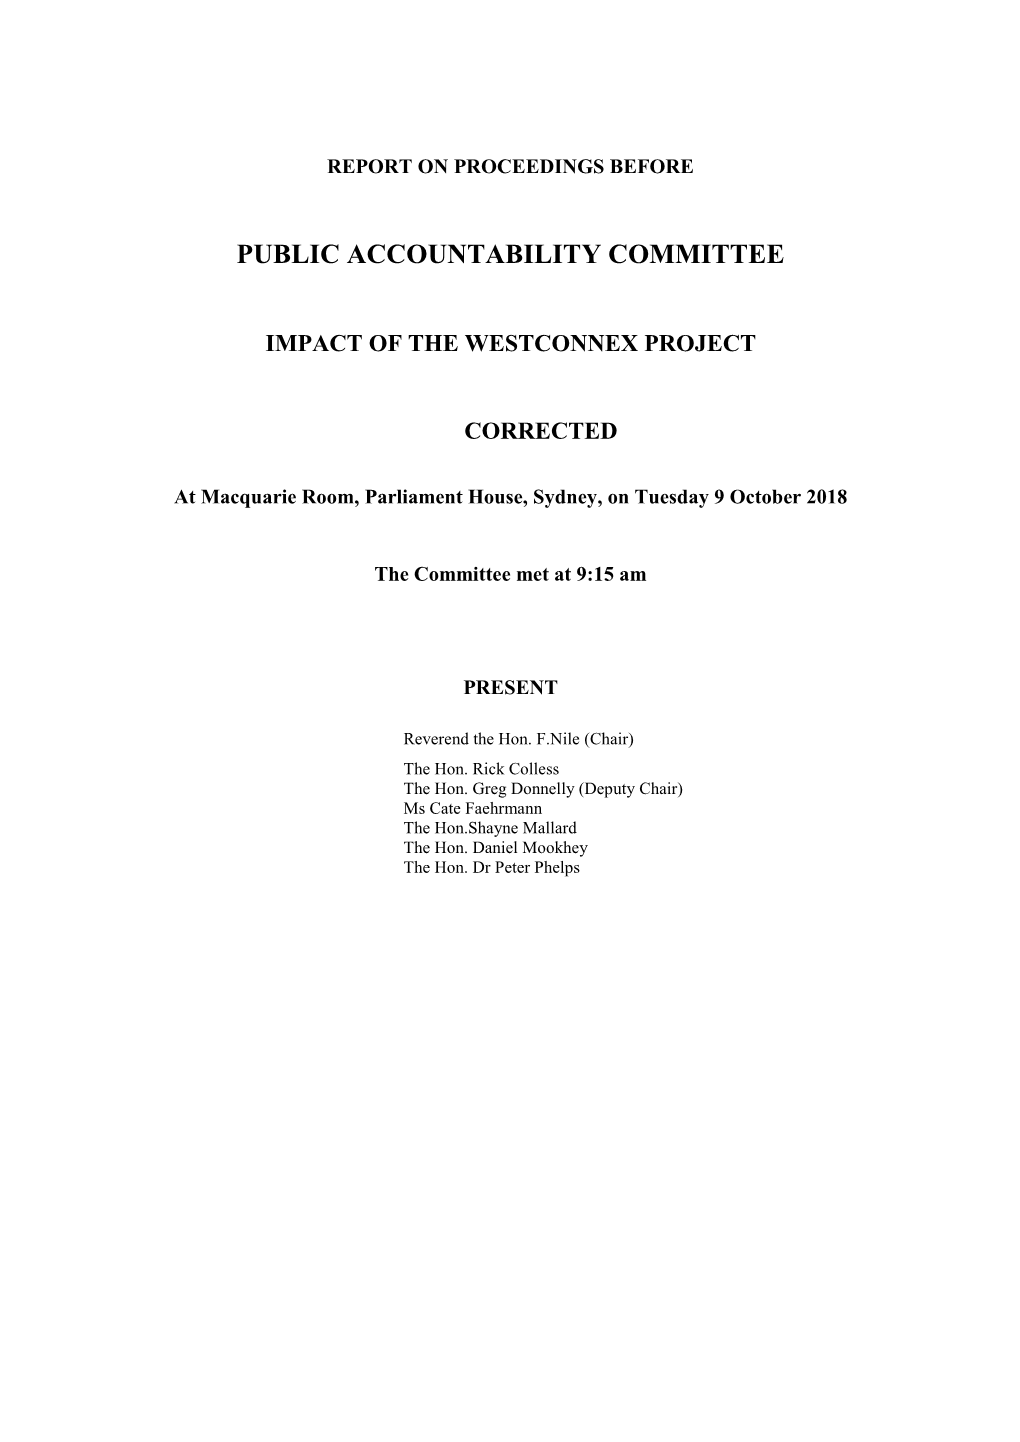 Public Accountability Committee